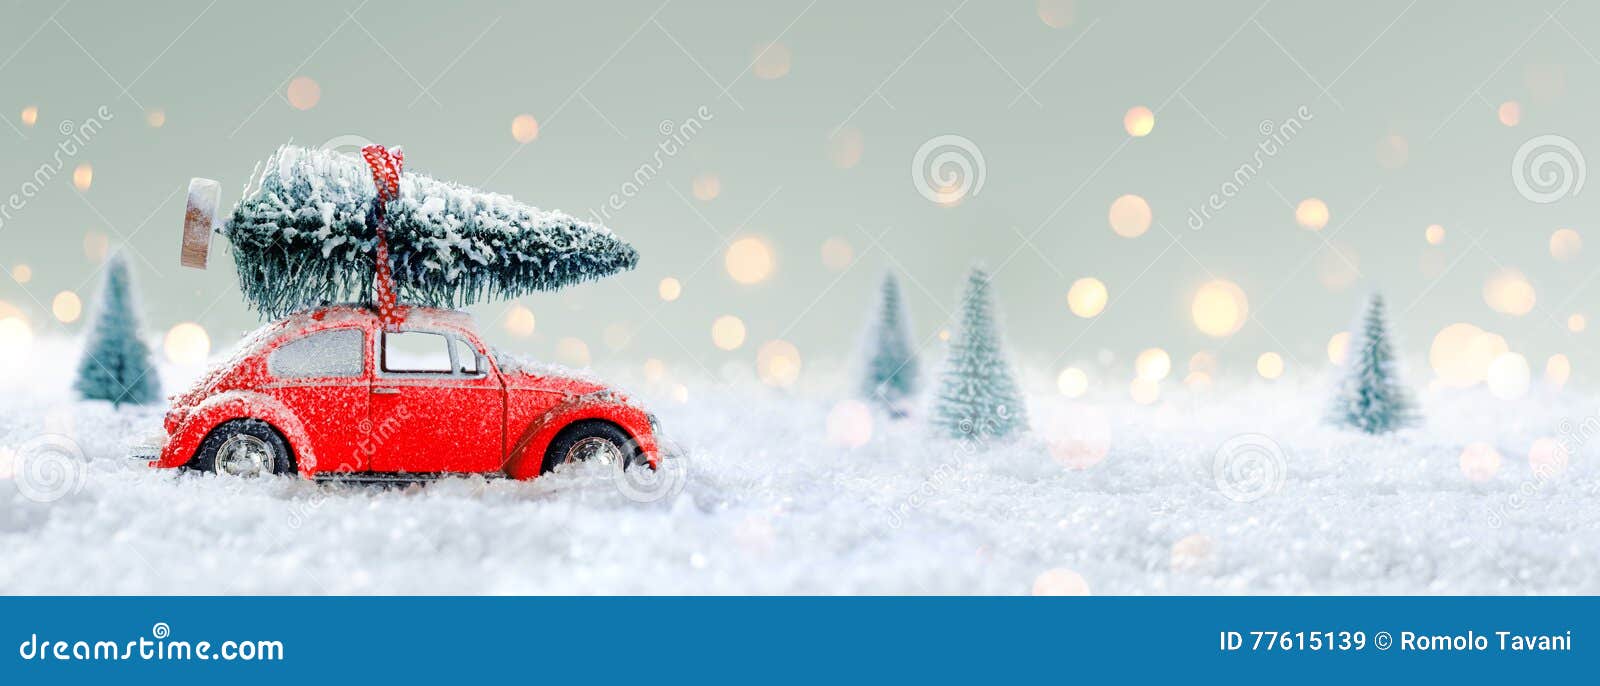 red car carrying a christmas tree